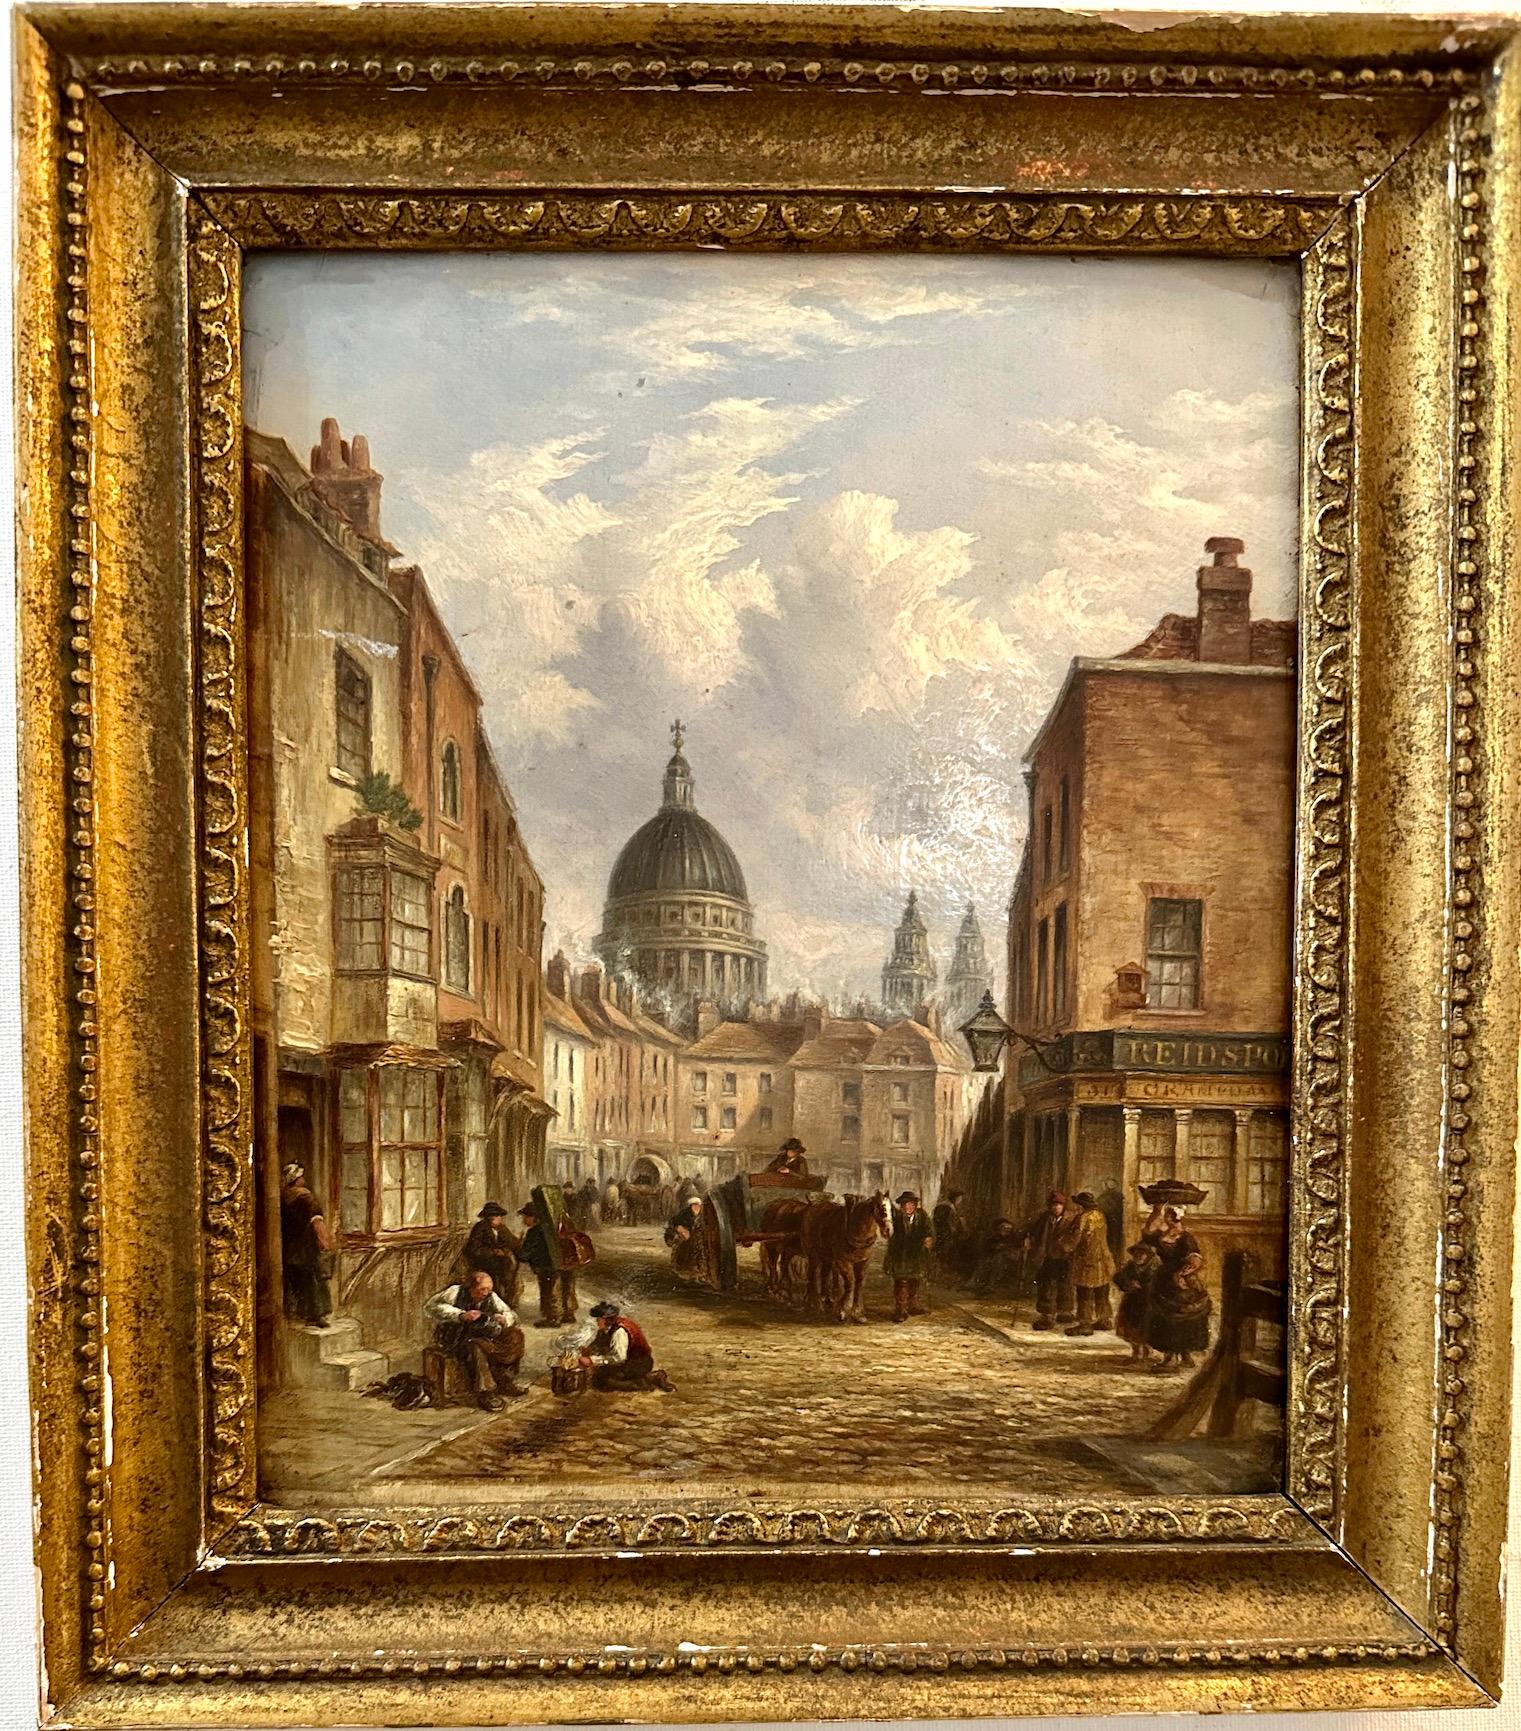  John Wykeham Archer Landscape Painting - 19th century City view of London from Fleet Street with St.Pauls, shops figures